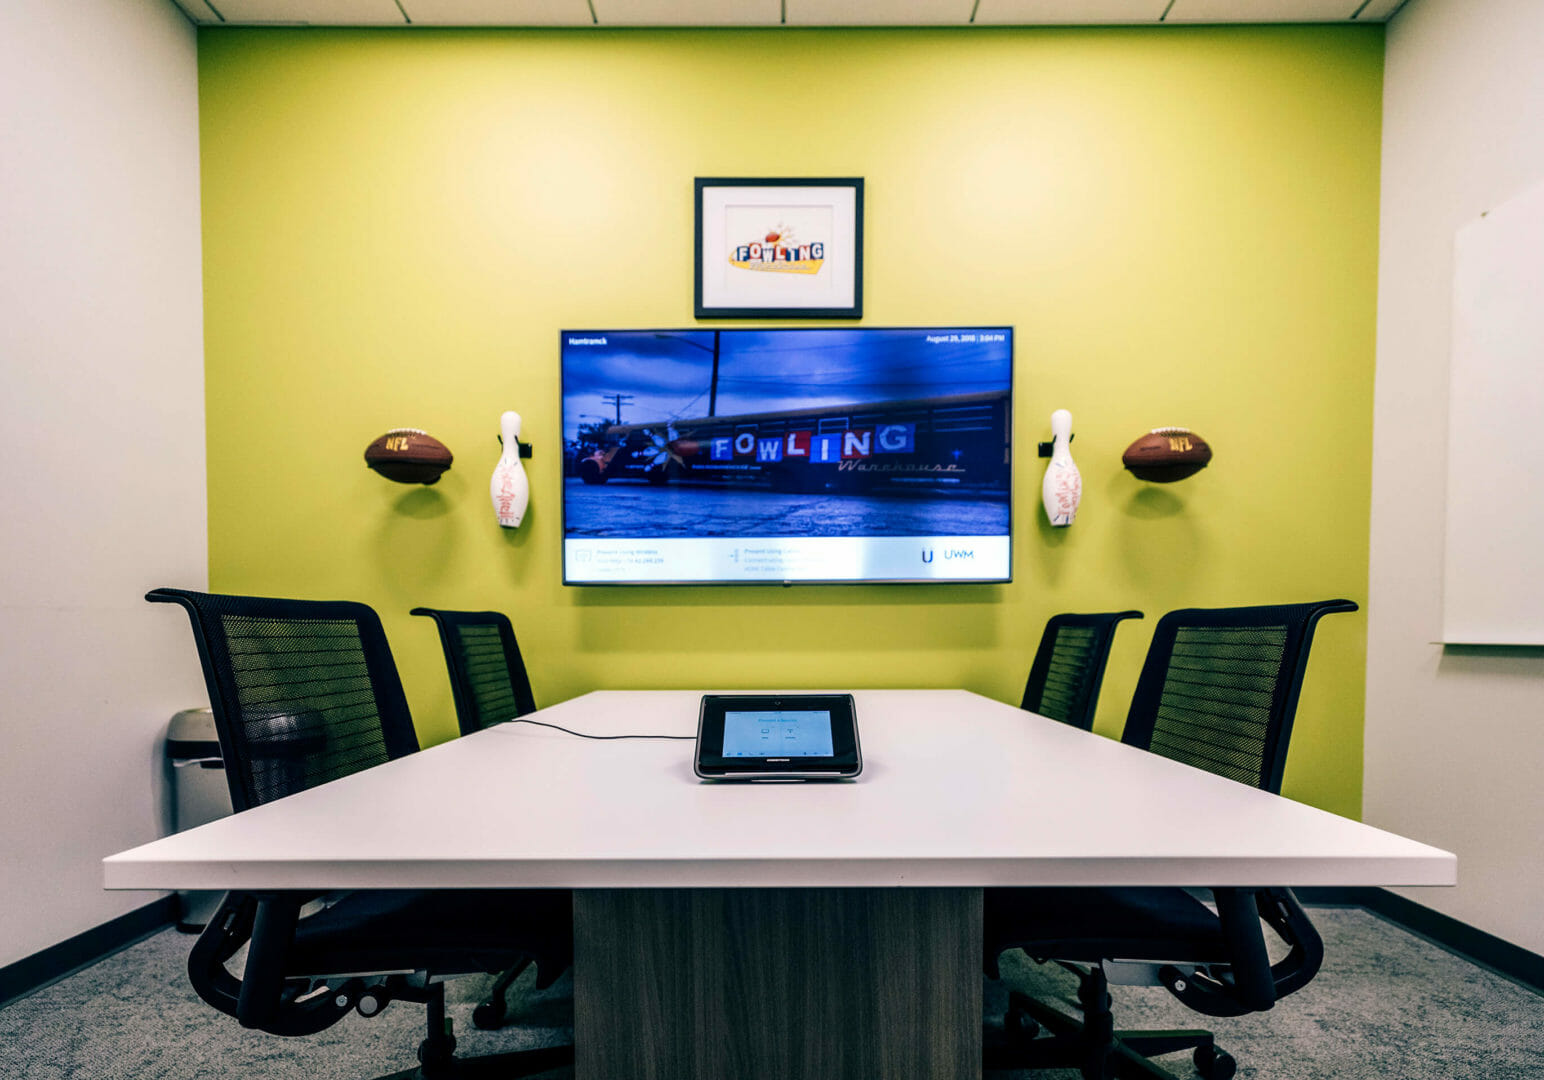 How The Mini Conference Room Size Trend is Evolving